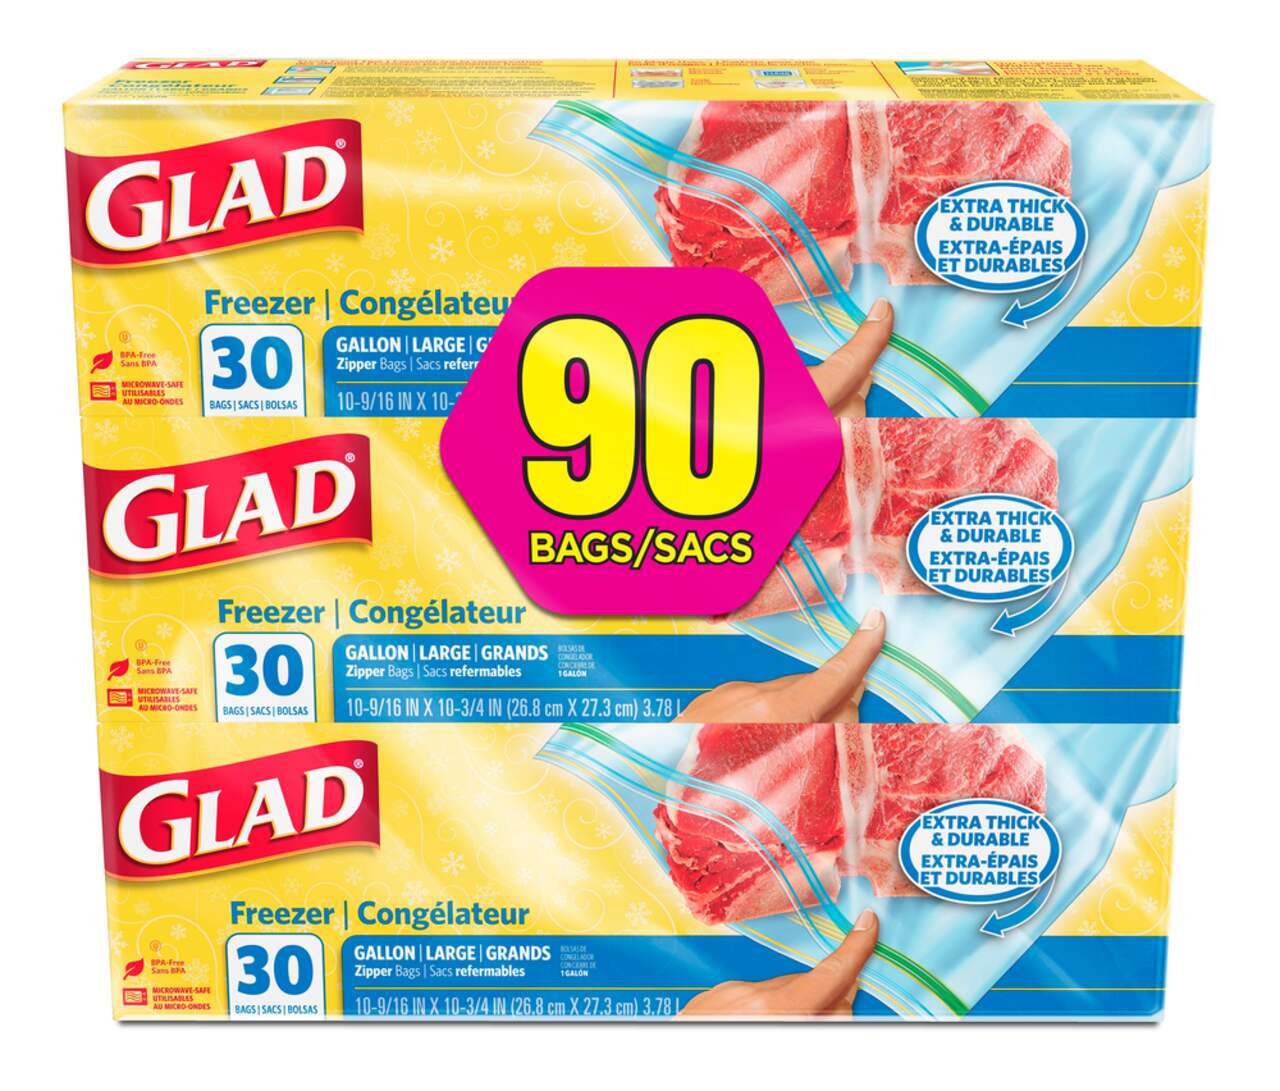  Glad Zipper Food Storage Plastic Bags, Gallon, 40 Count  (Packaging May Vary) : Health & Household